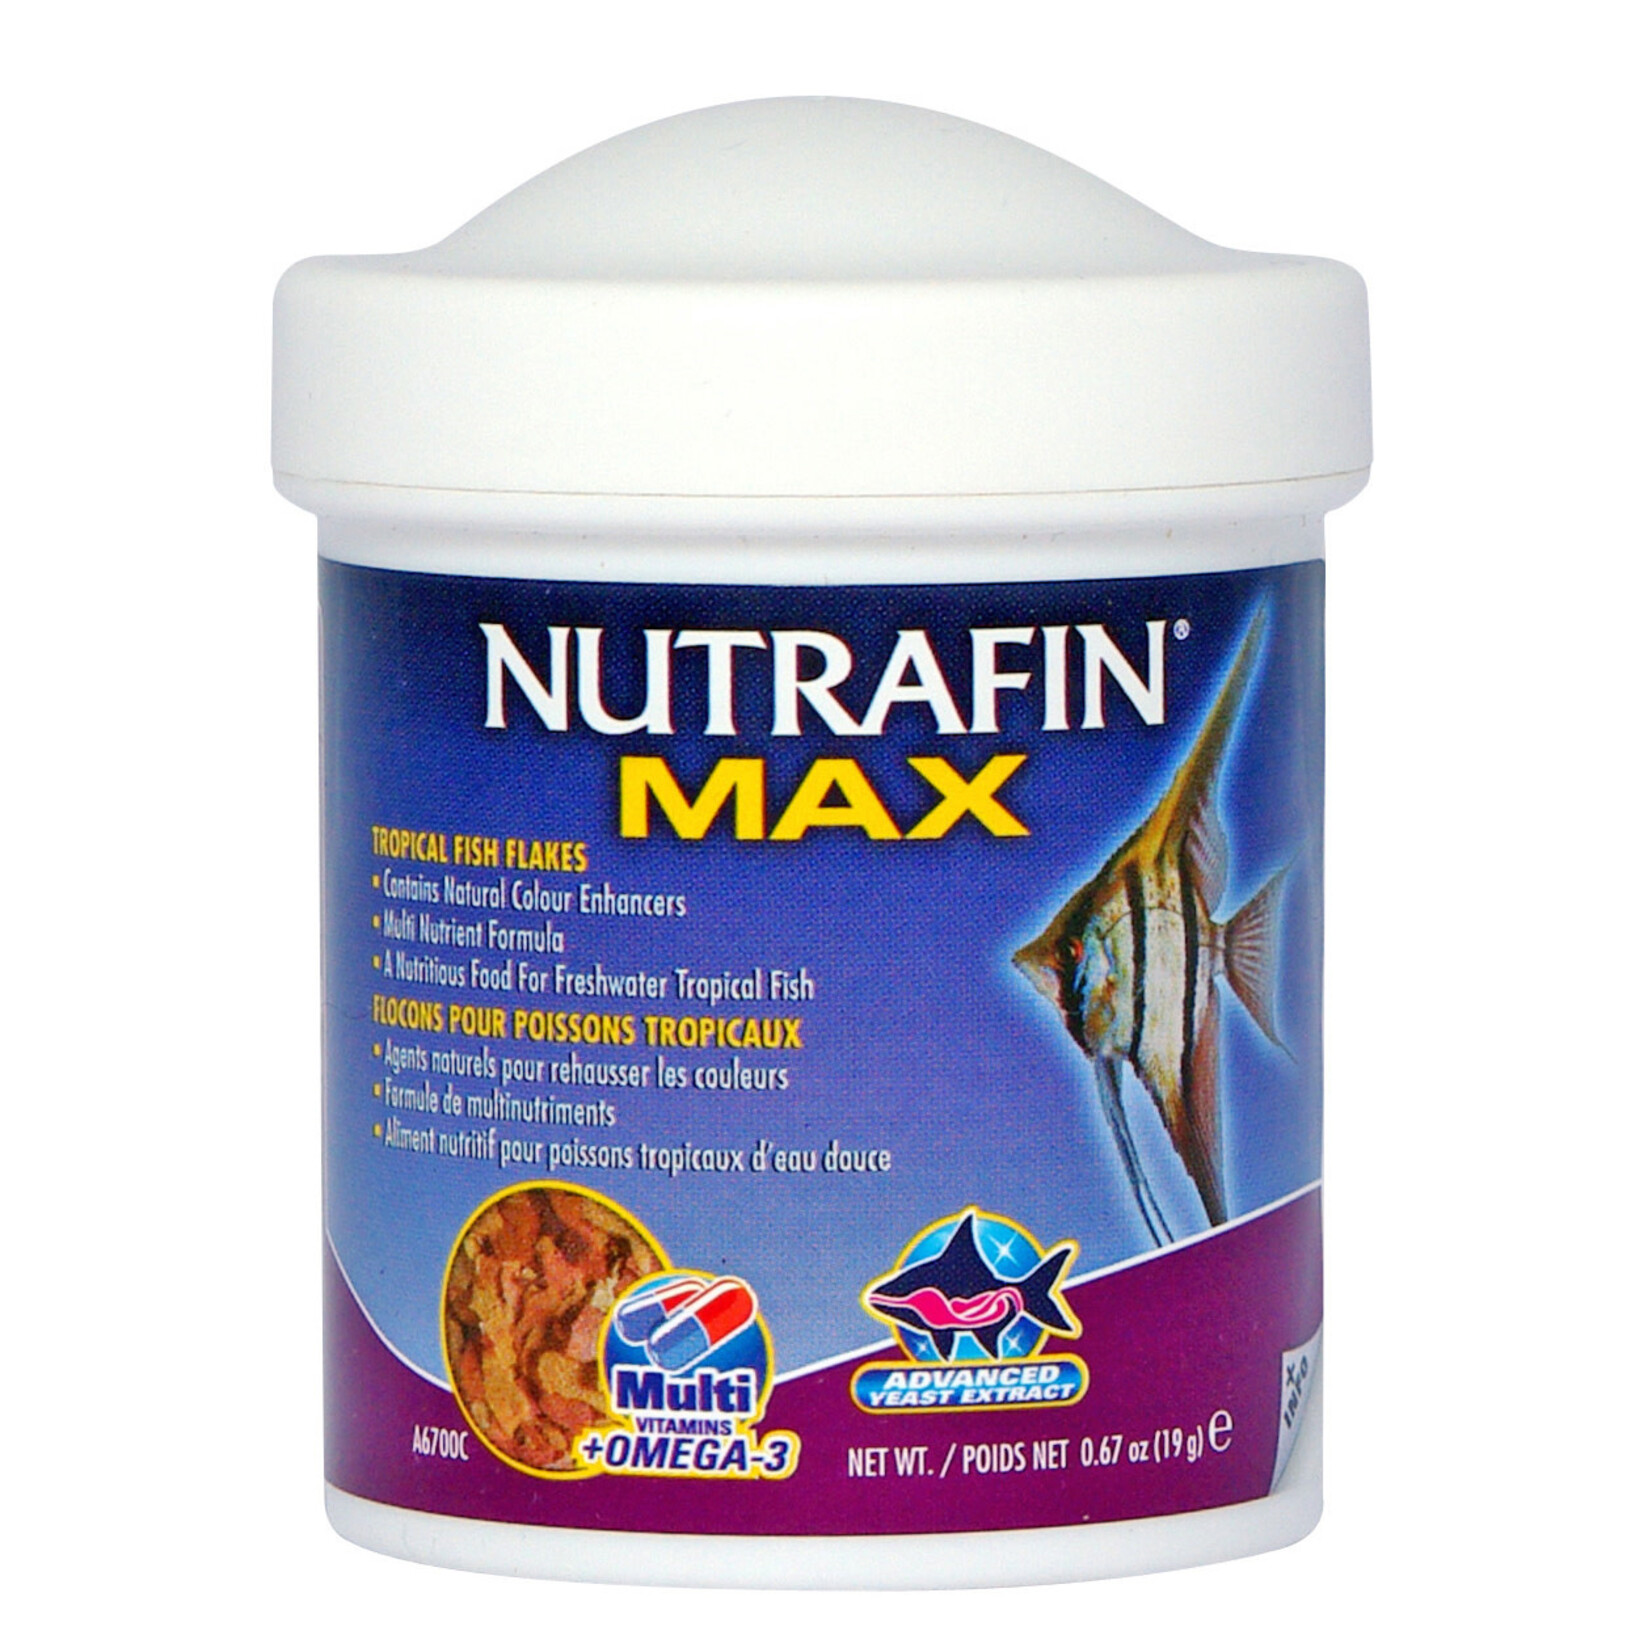 NUTRAFIN NUTRAFIN MAX FLOCONS POUR POISSONS TROPICAUX 19 G